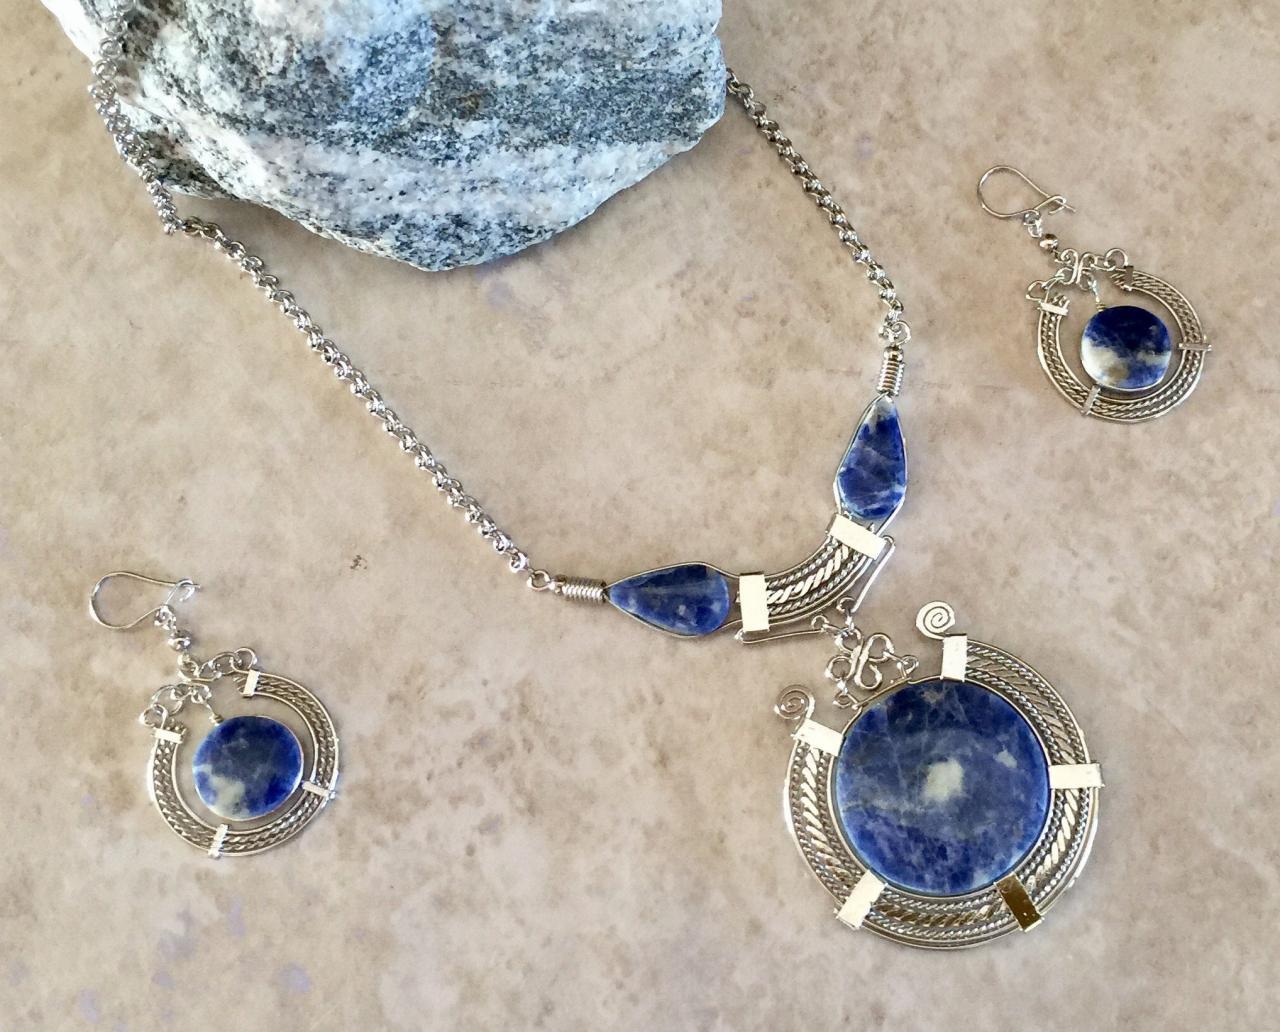 New! Sodalite Medallion Necklace and Earrings, Blue Neck Geometric Necklace, Round Shape Necklace, Minimalist Necklace, Handmade Neck